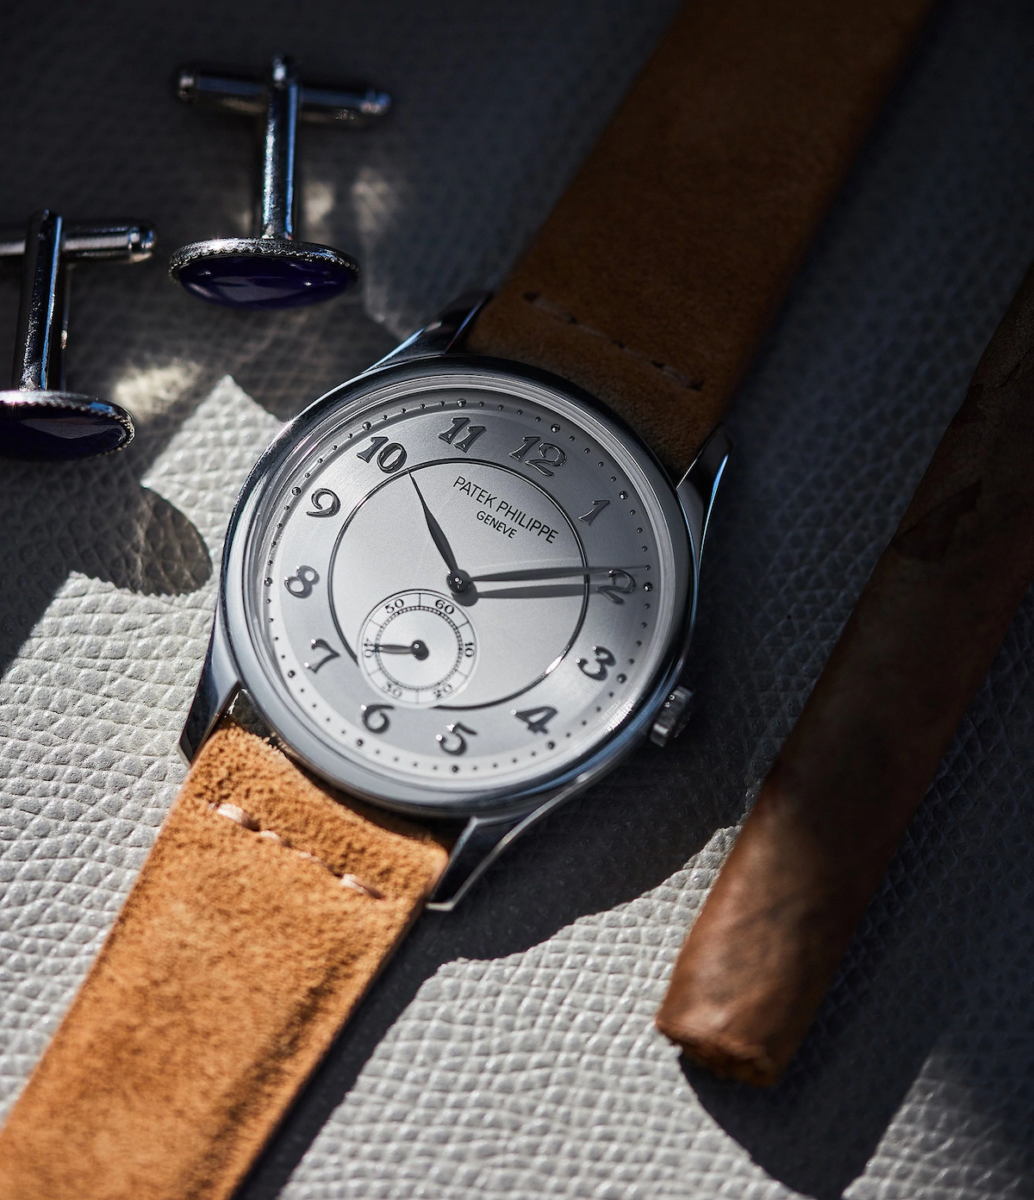 The Best Watch Straps For Any Timepiece In Your Collection